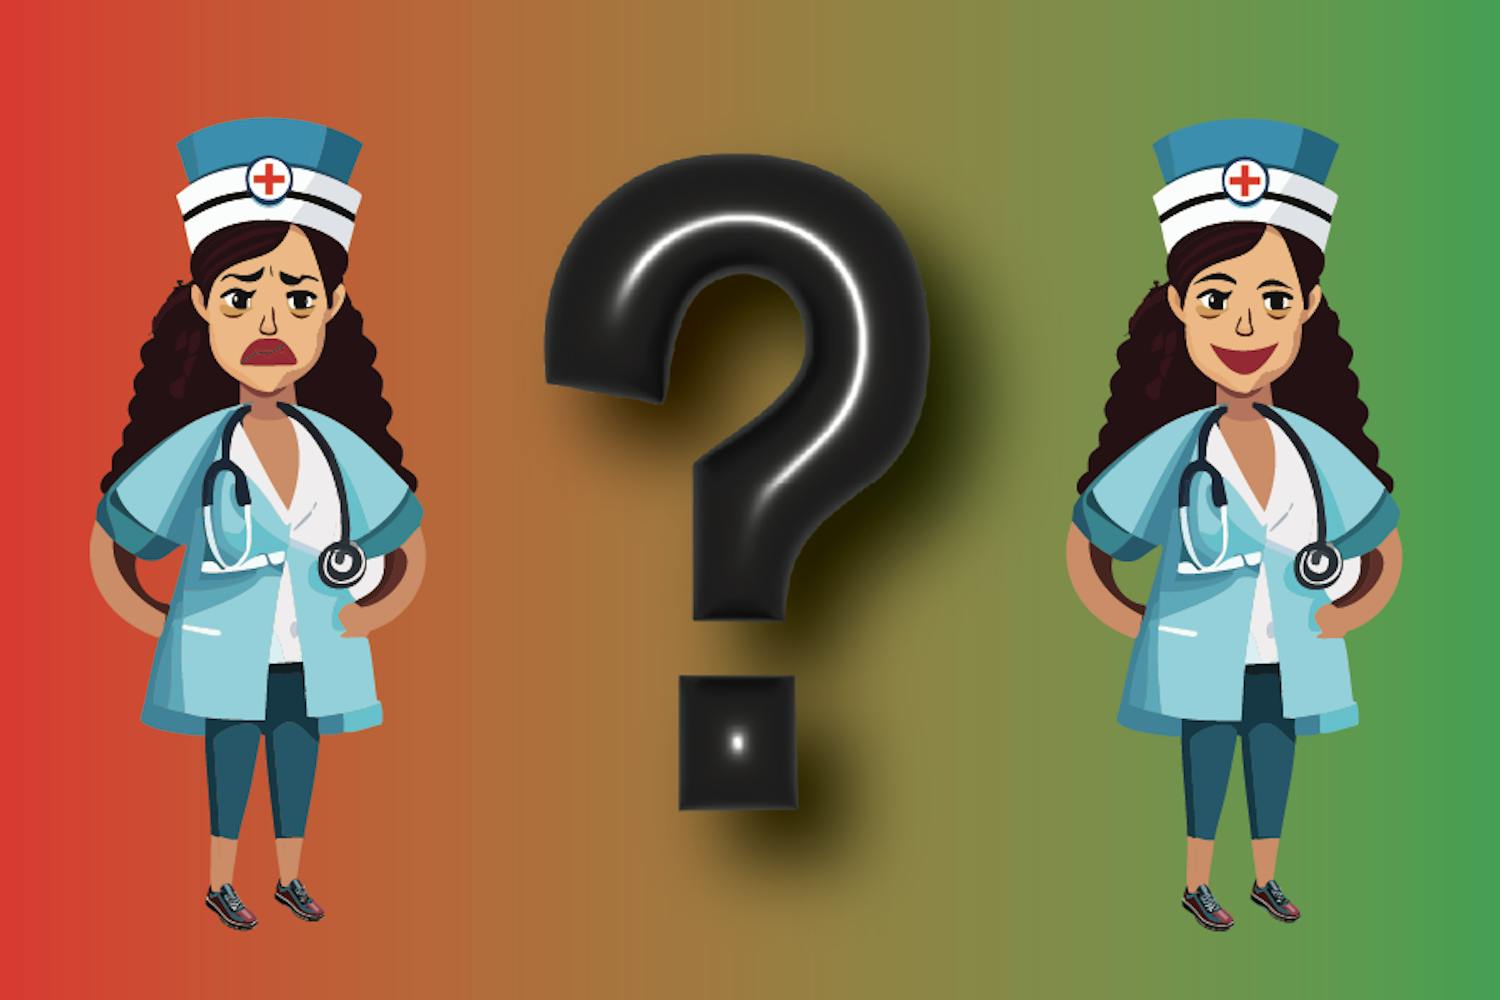 The real world impact of the social media 'mean nurse' stereotype